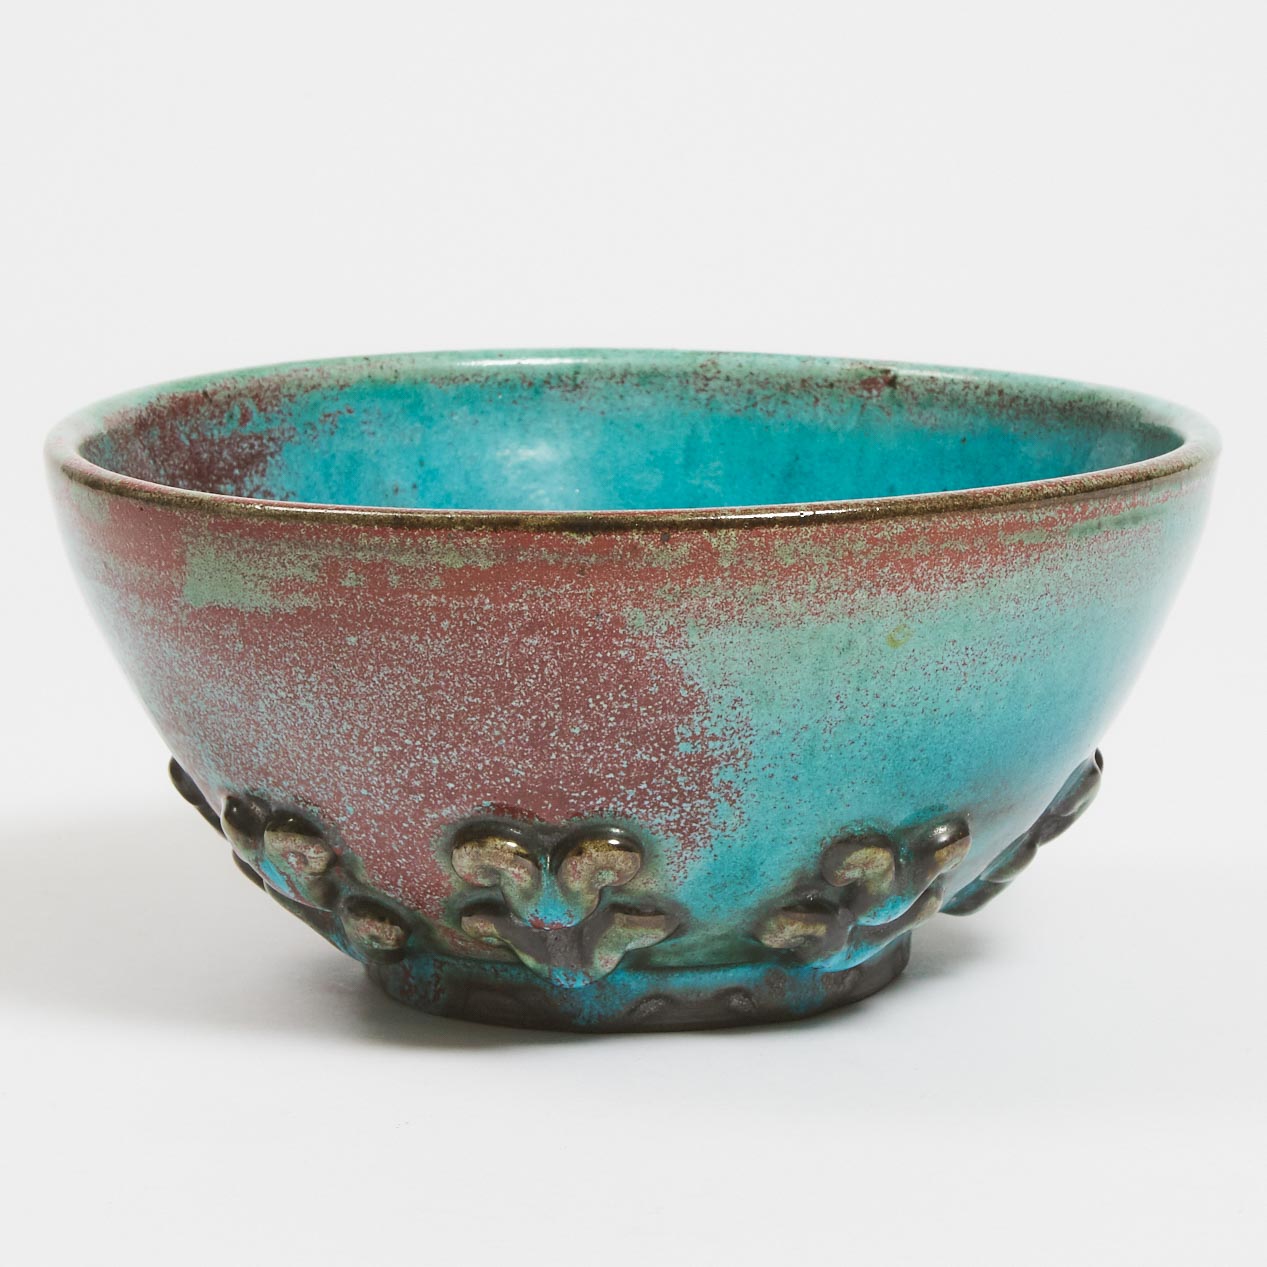 Deichmann Mottled Blue and Red Glazed Stoneware Bowl, mid-20th century